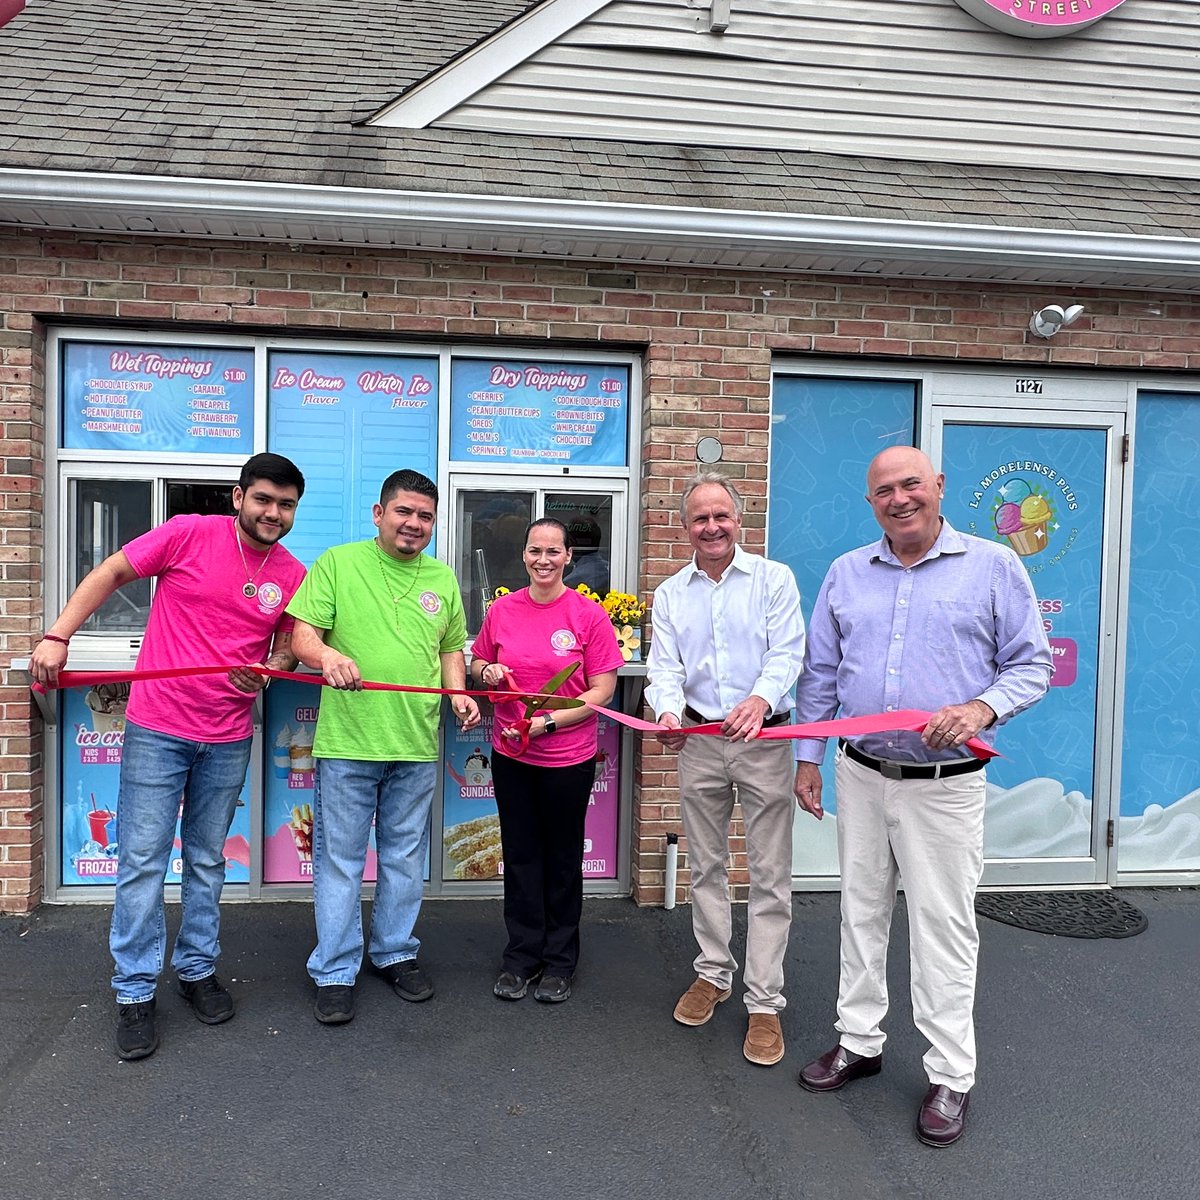 Welcome to La Morelense Plus!  Haddon Twp.’s newest addition where ice cream is created with love & fun! 📍1127 White Horse Pike #grand opening #haddontwp #icecream #mexicantreats